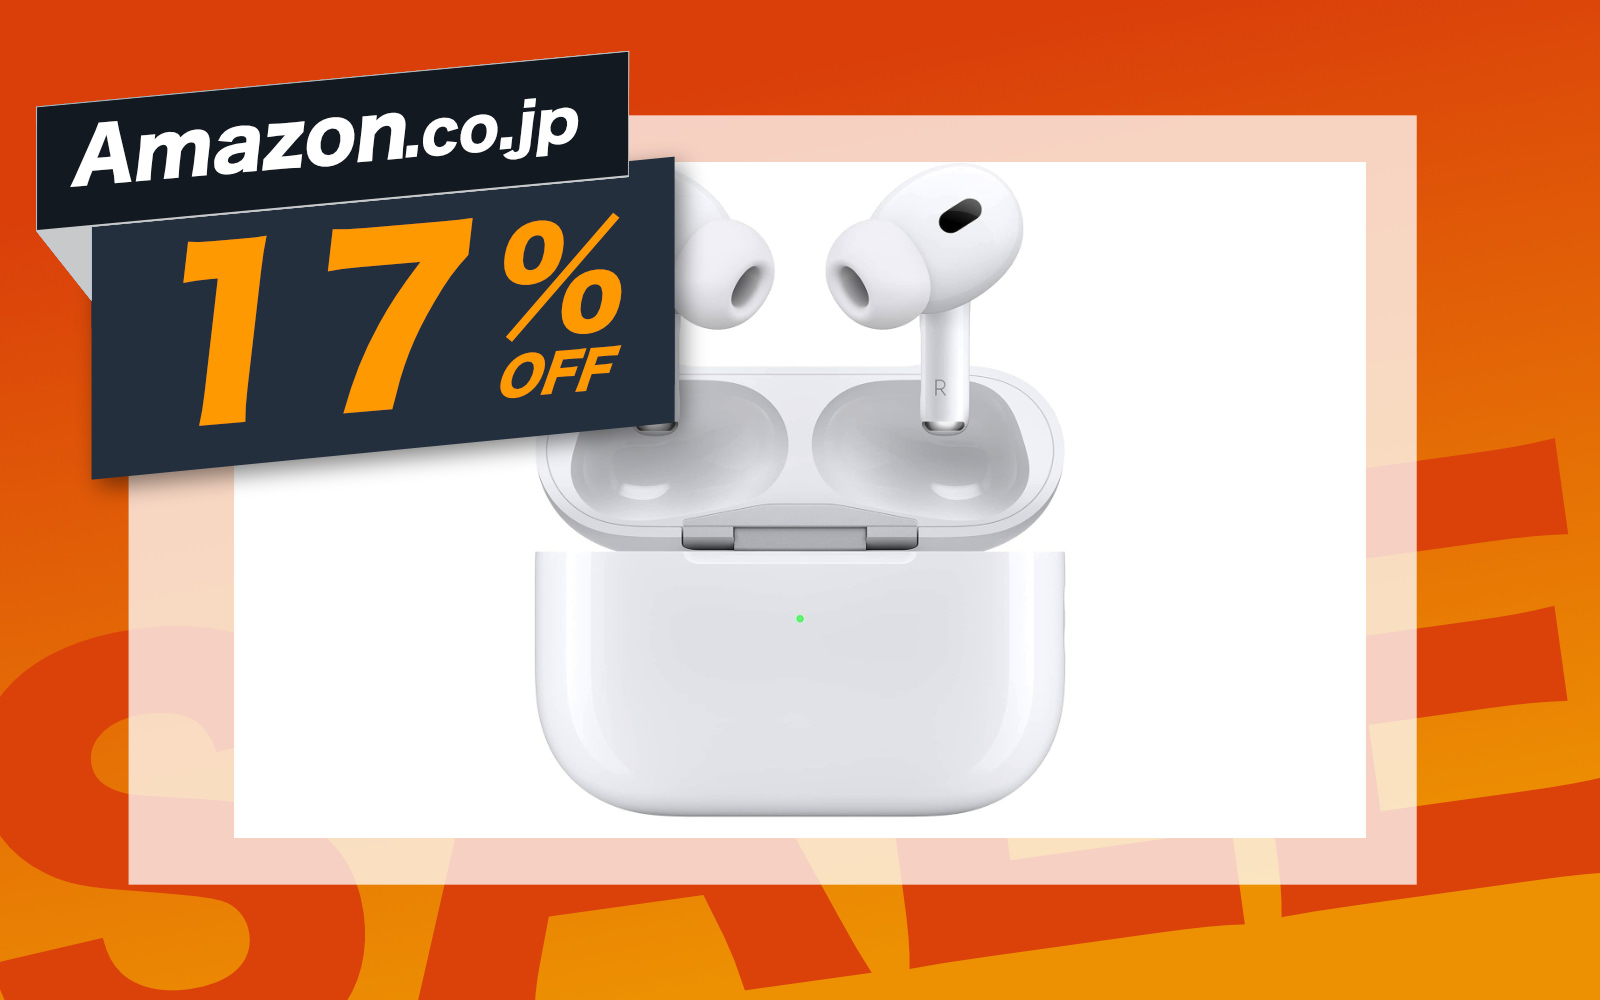 Airpods Pro 2nggen on sale